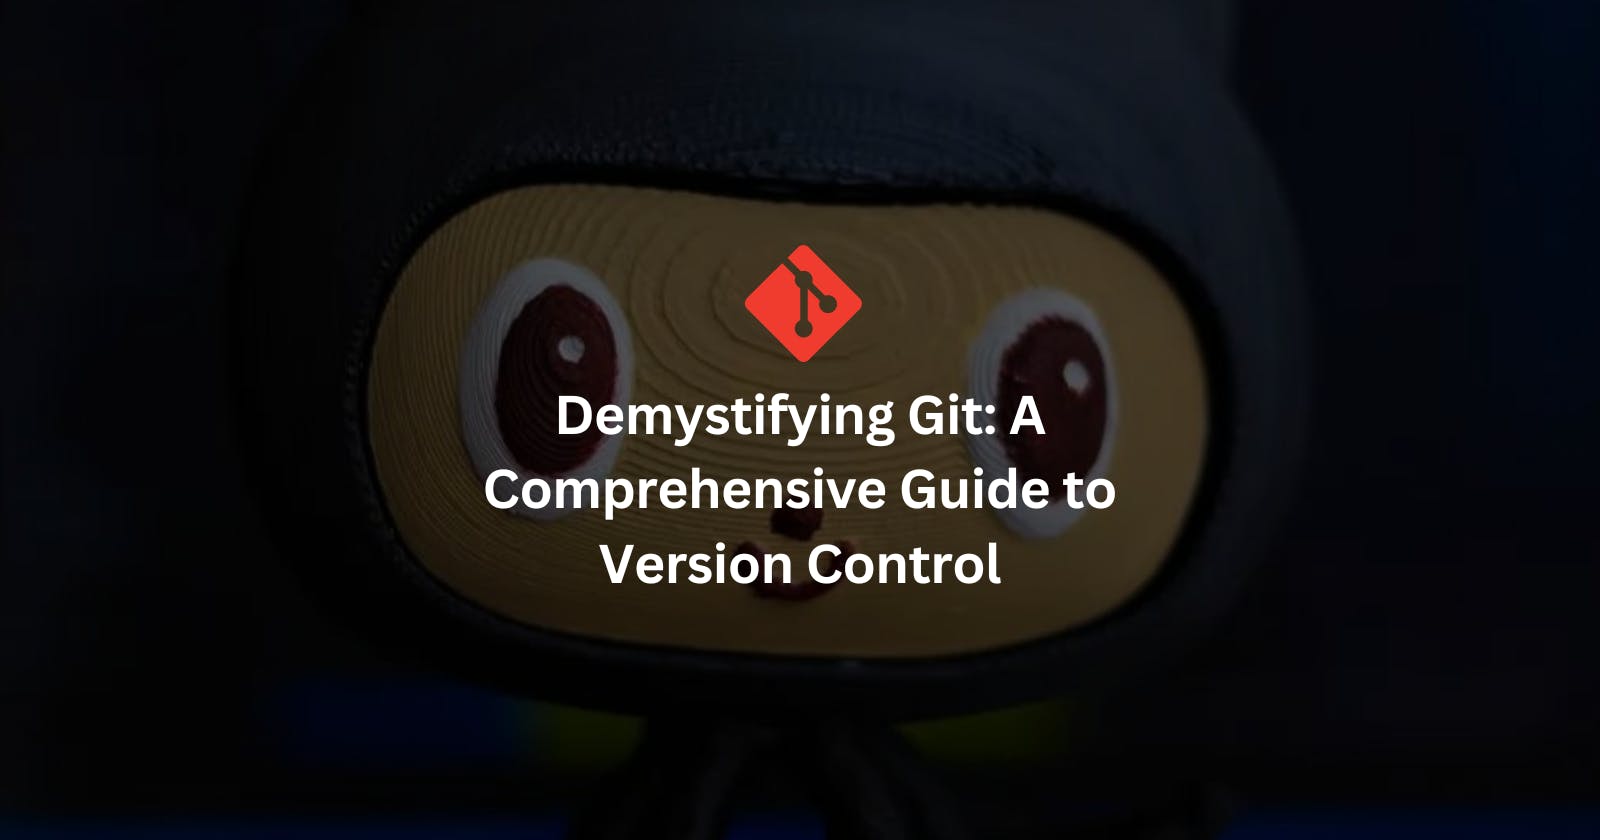 Demystifying Git: A Comprehensive Guide to Version Control